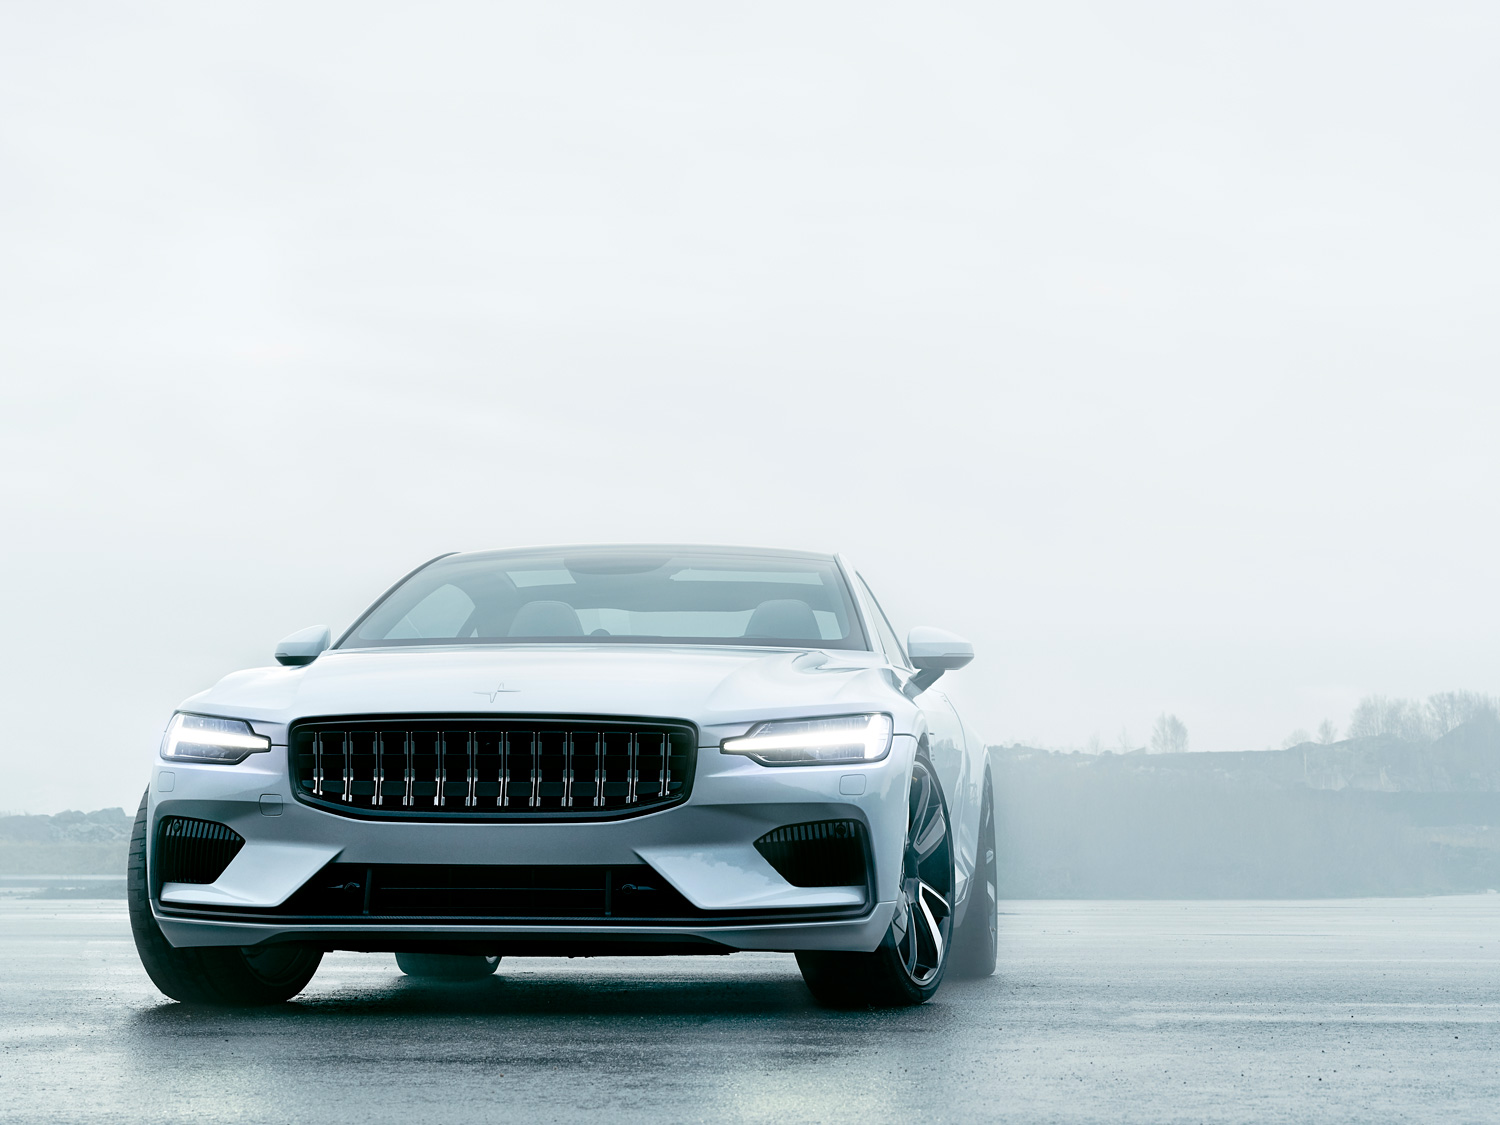 Polestar 1 now available for pre-order in 18 countries.